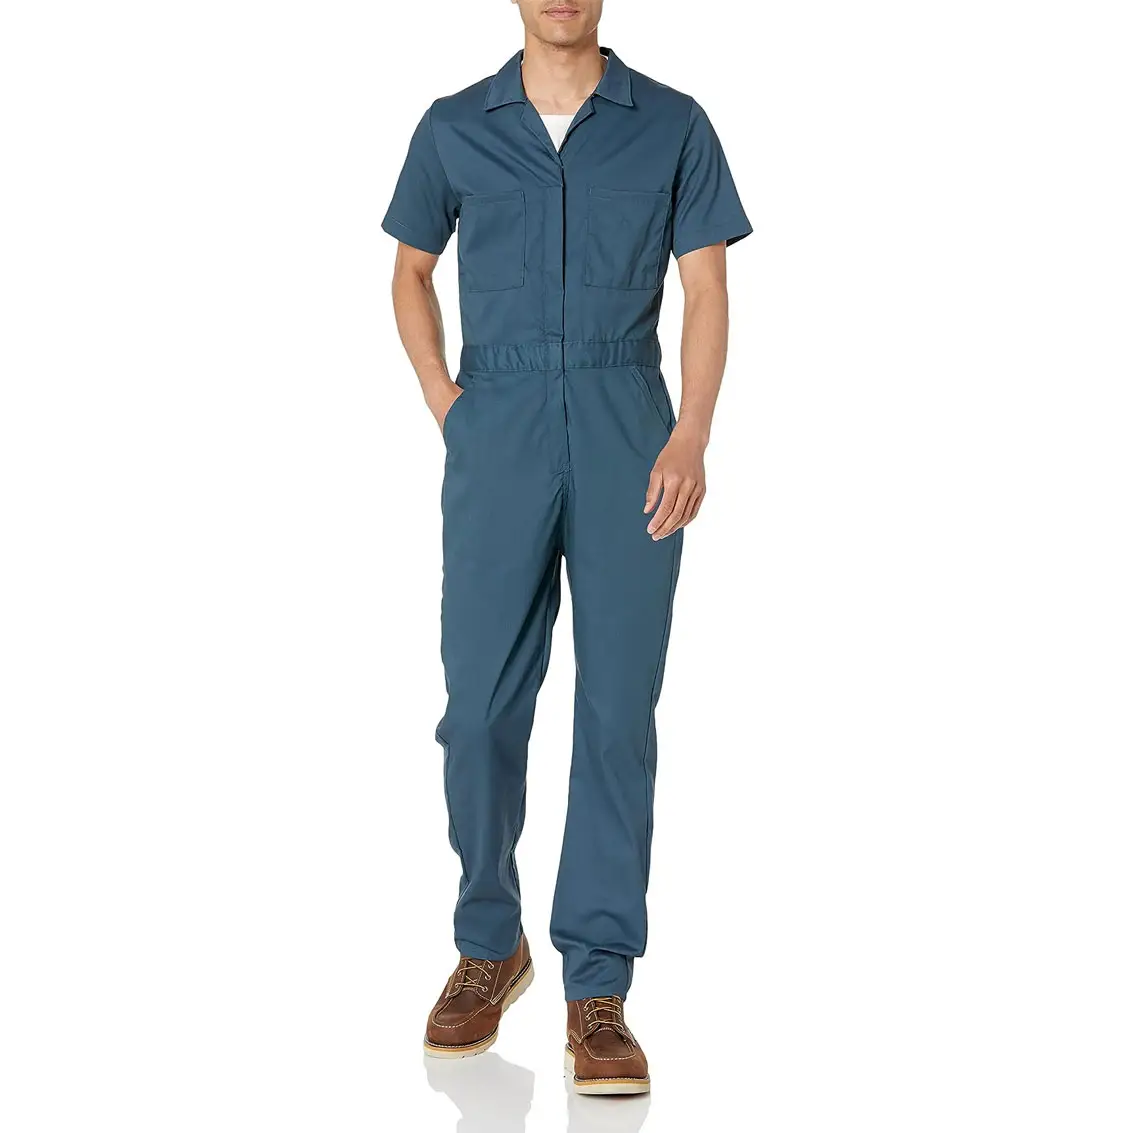 Coveralls Suit Plus Size Clothes High Quality Wholesale Coverall Work Overall Uniform Men Women Working